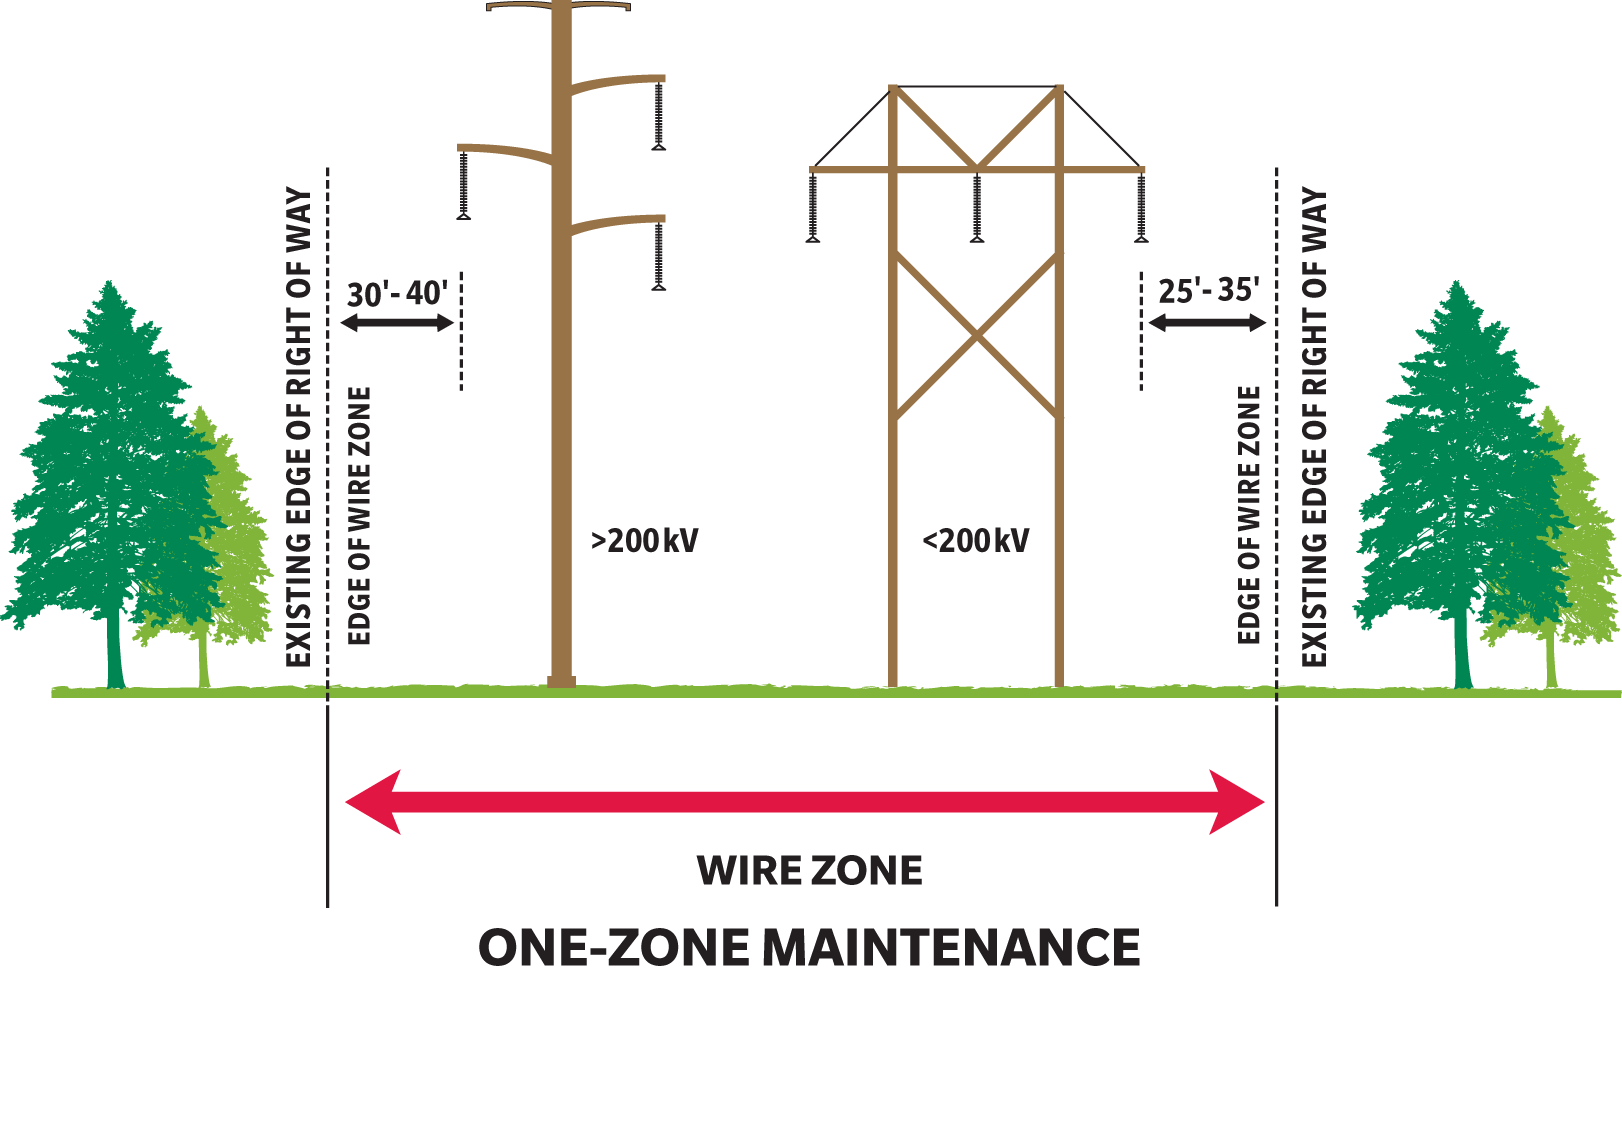 A diagram showing the wire zone within a transmission right of way